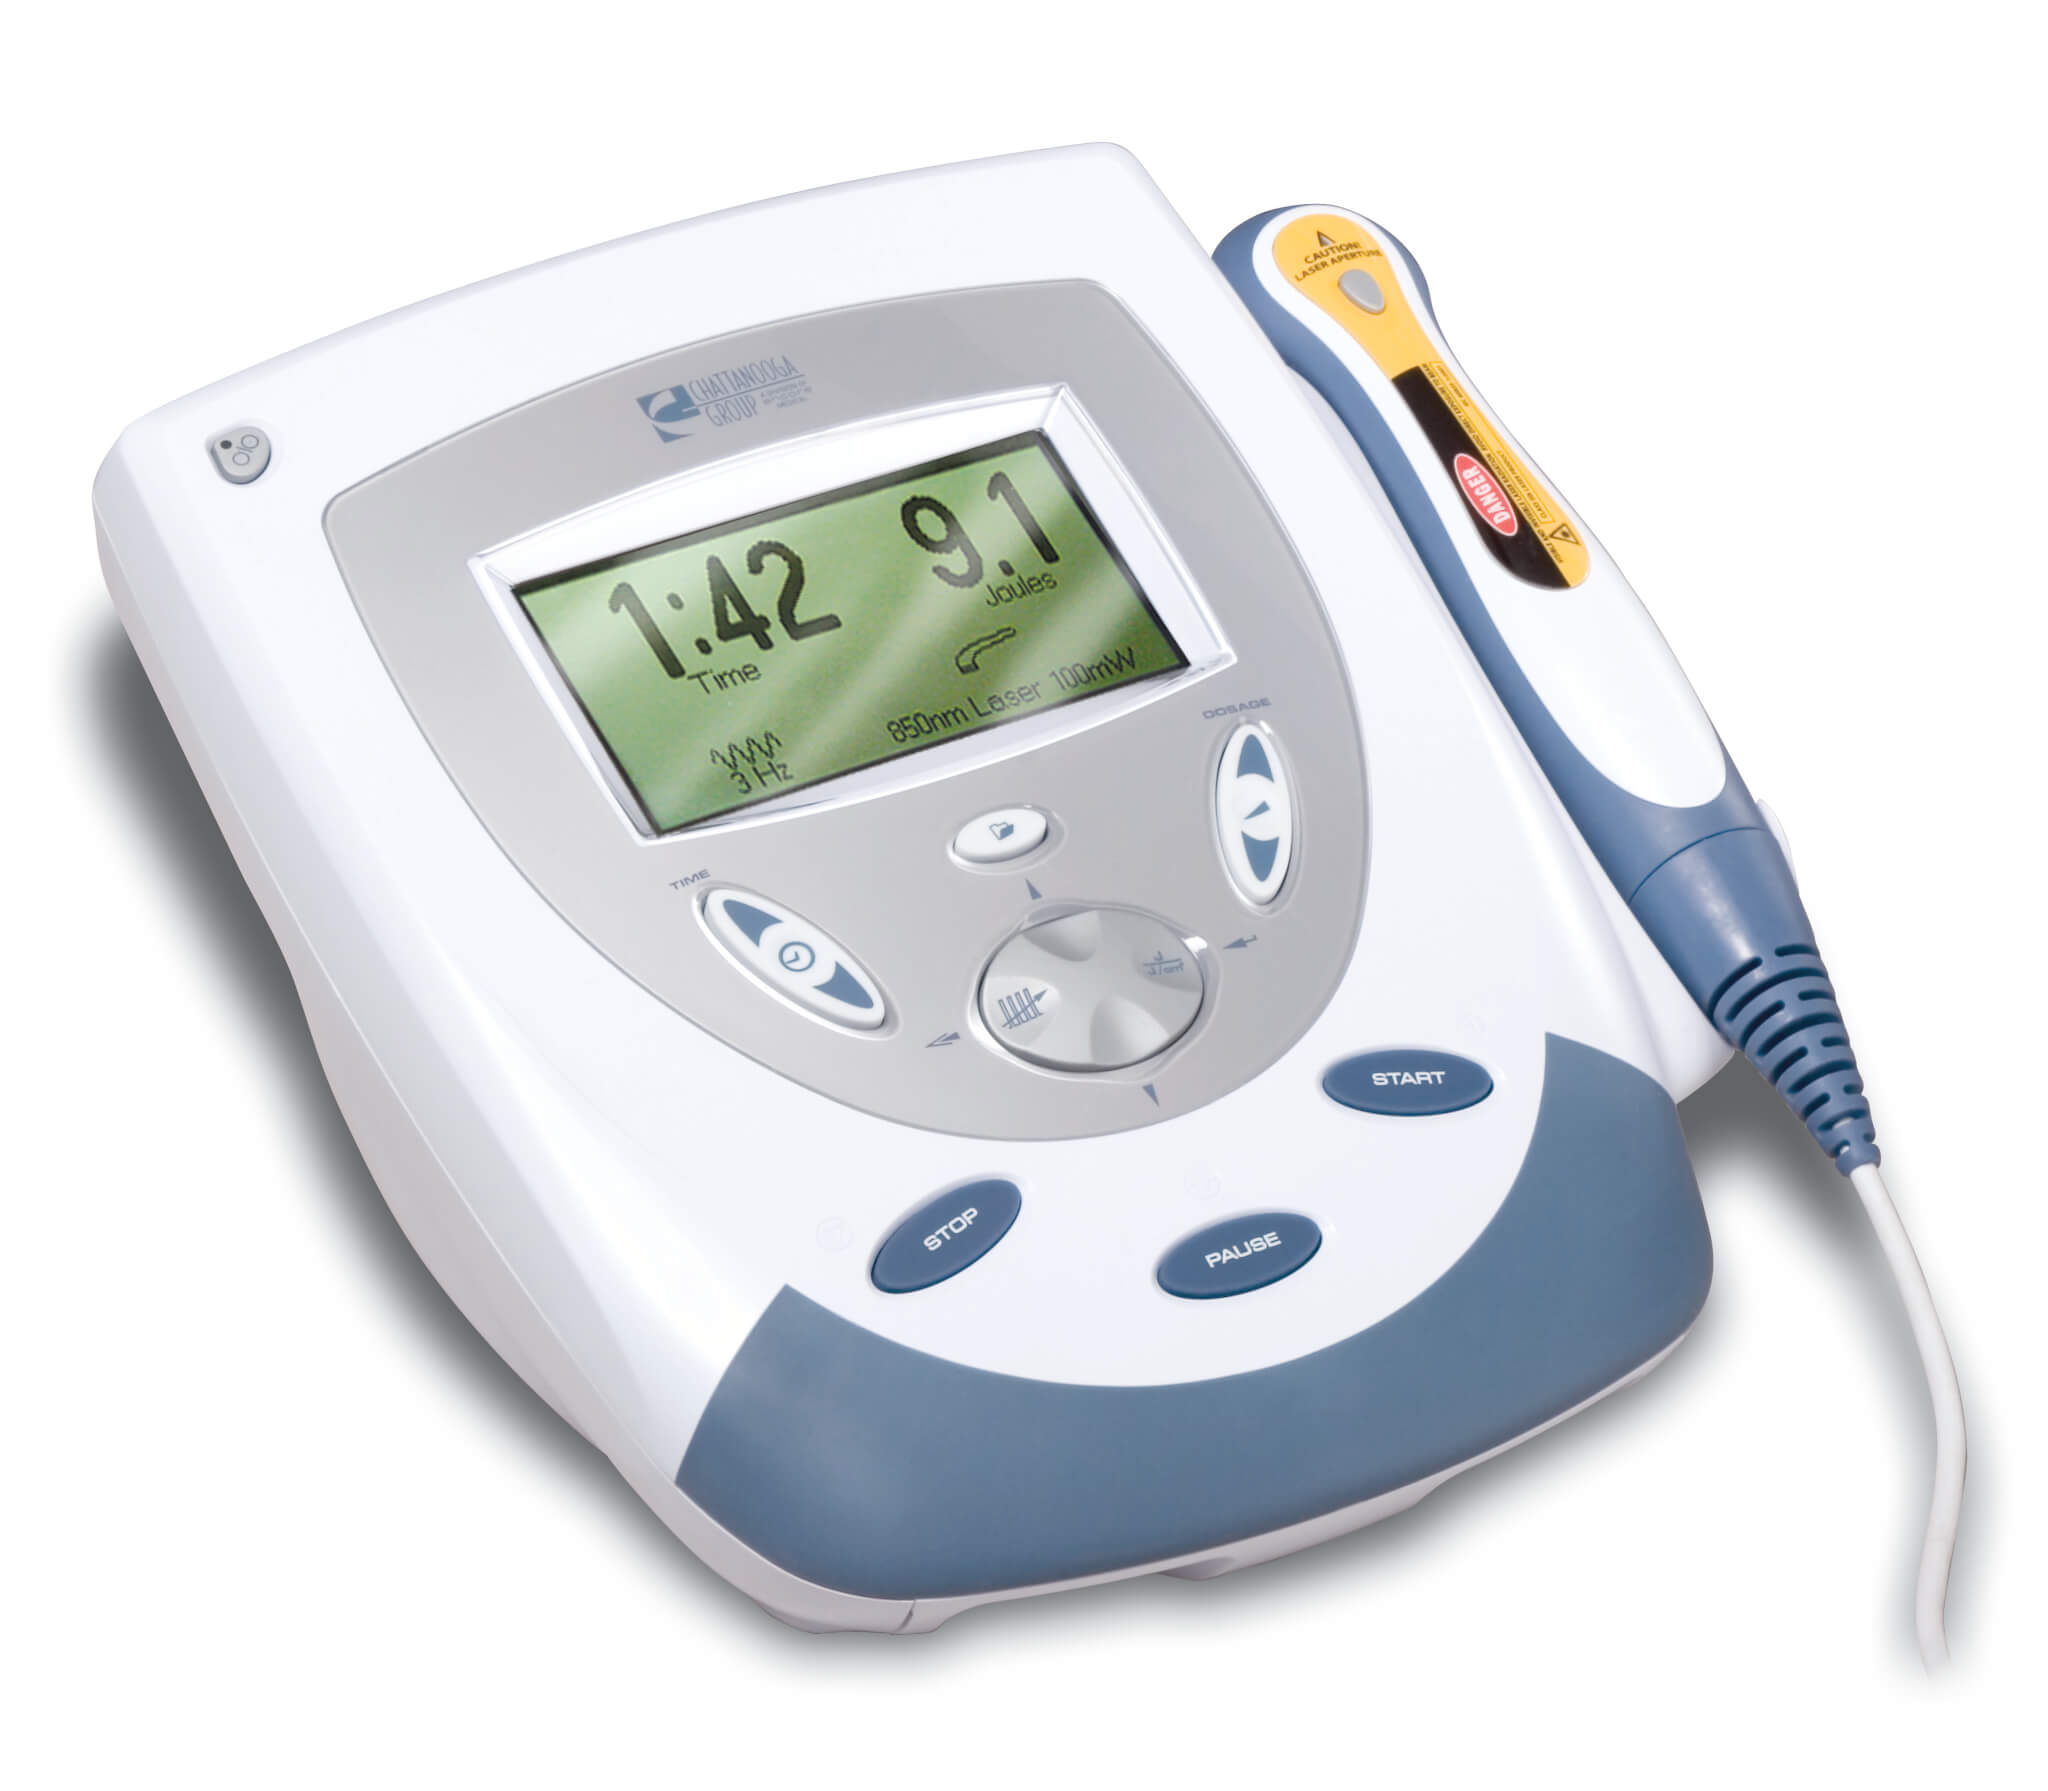 Electrotherapy Machine - Intelect Legend XT - A-1 Medical Integration